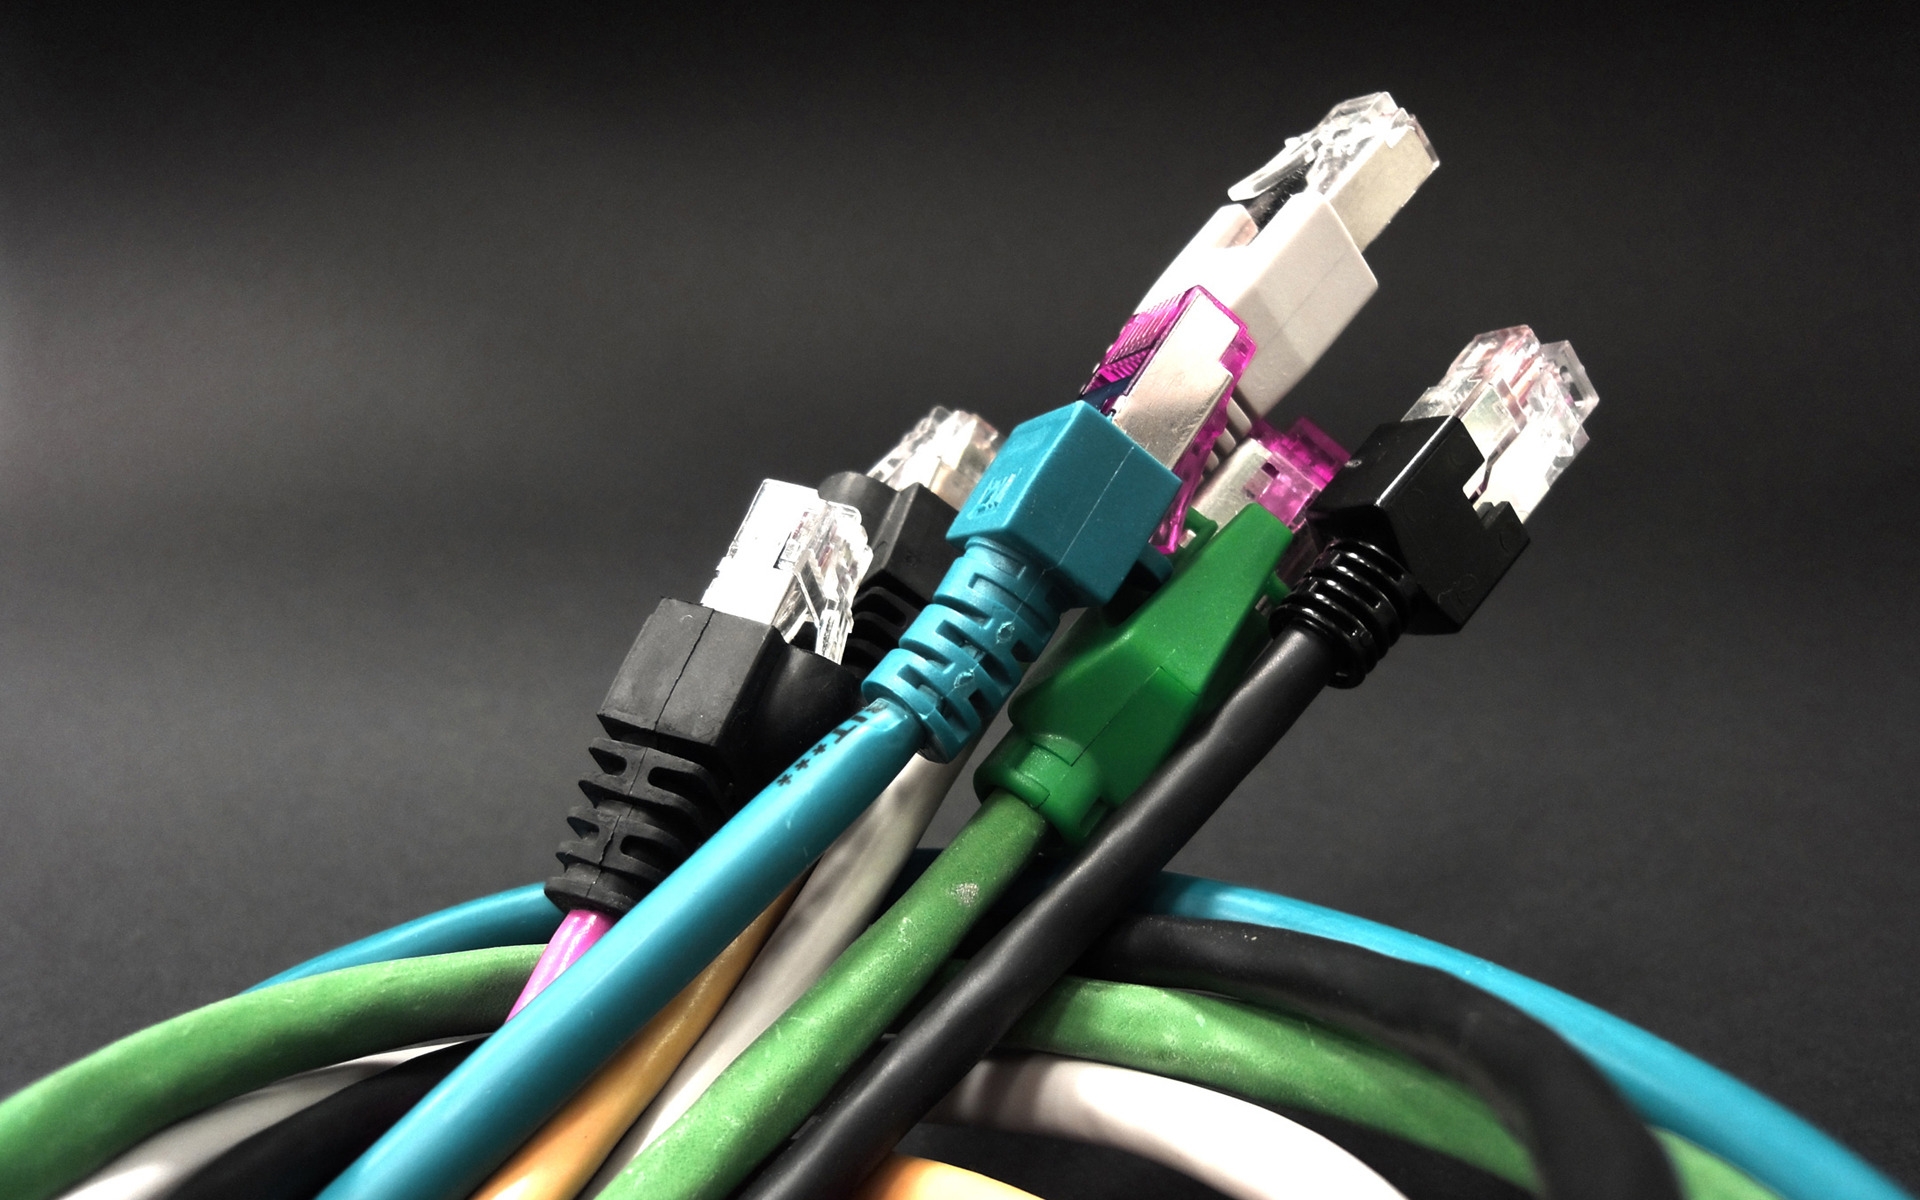 Internet Cables for 1920 x 1200 widescreen resolution